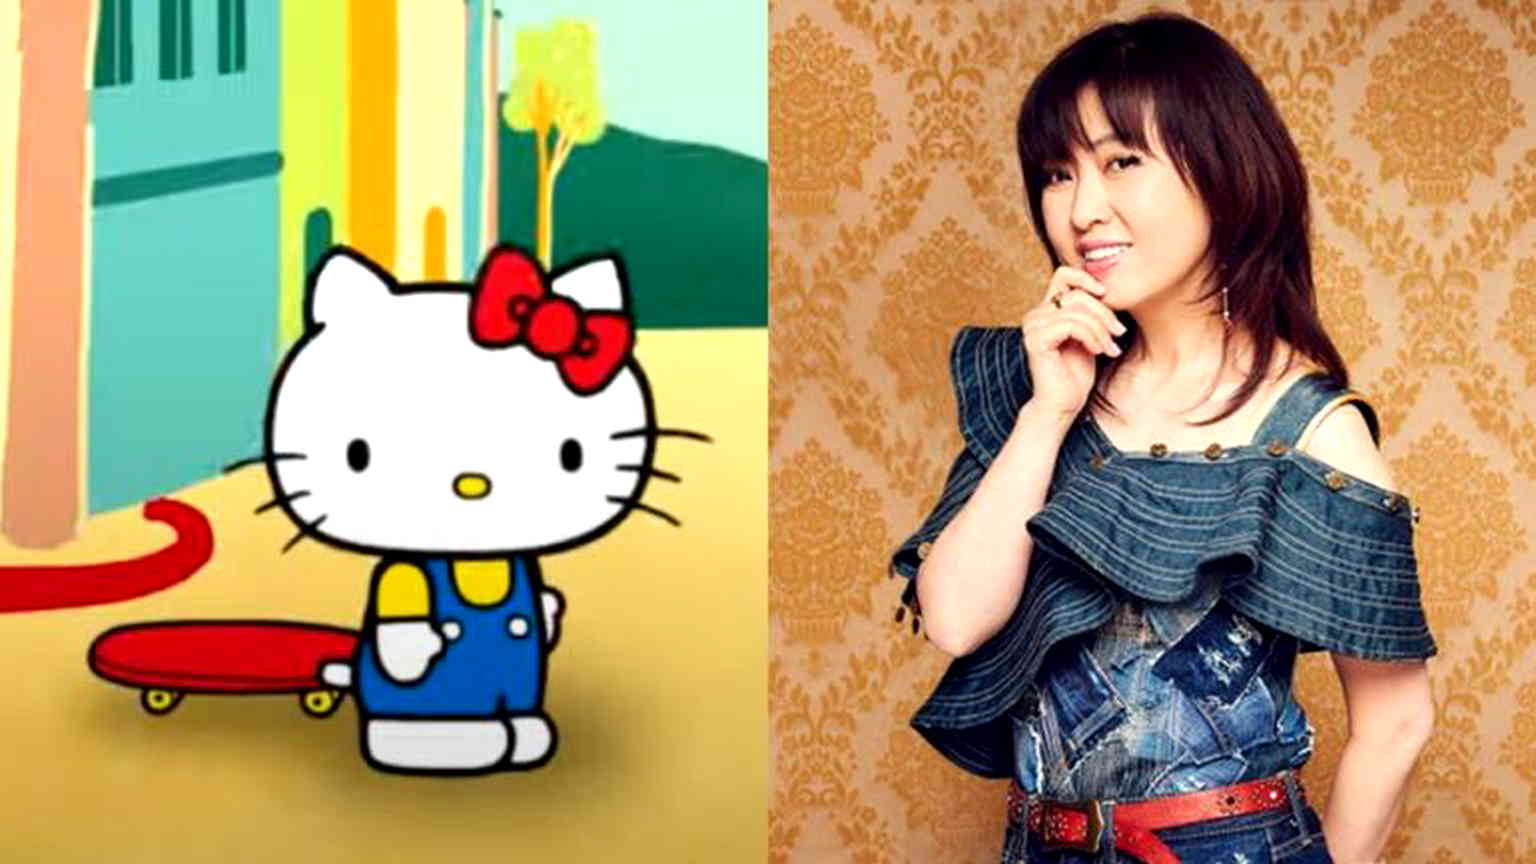 Hello Kitty voice actor announces departure from the character after 33 years